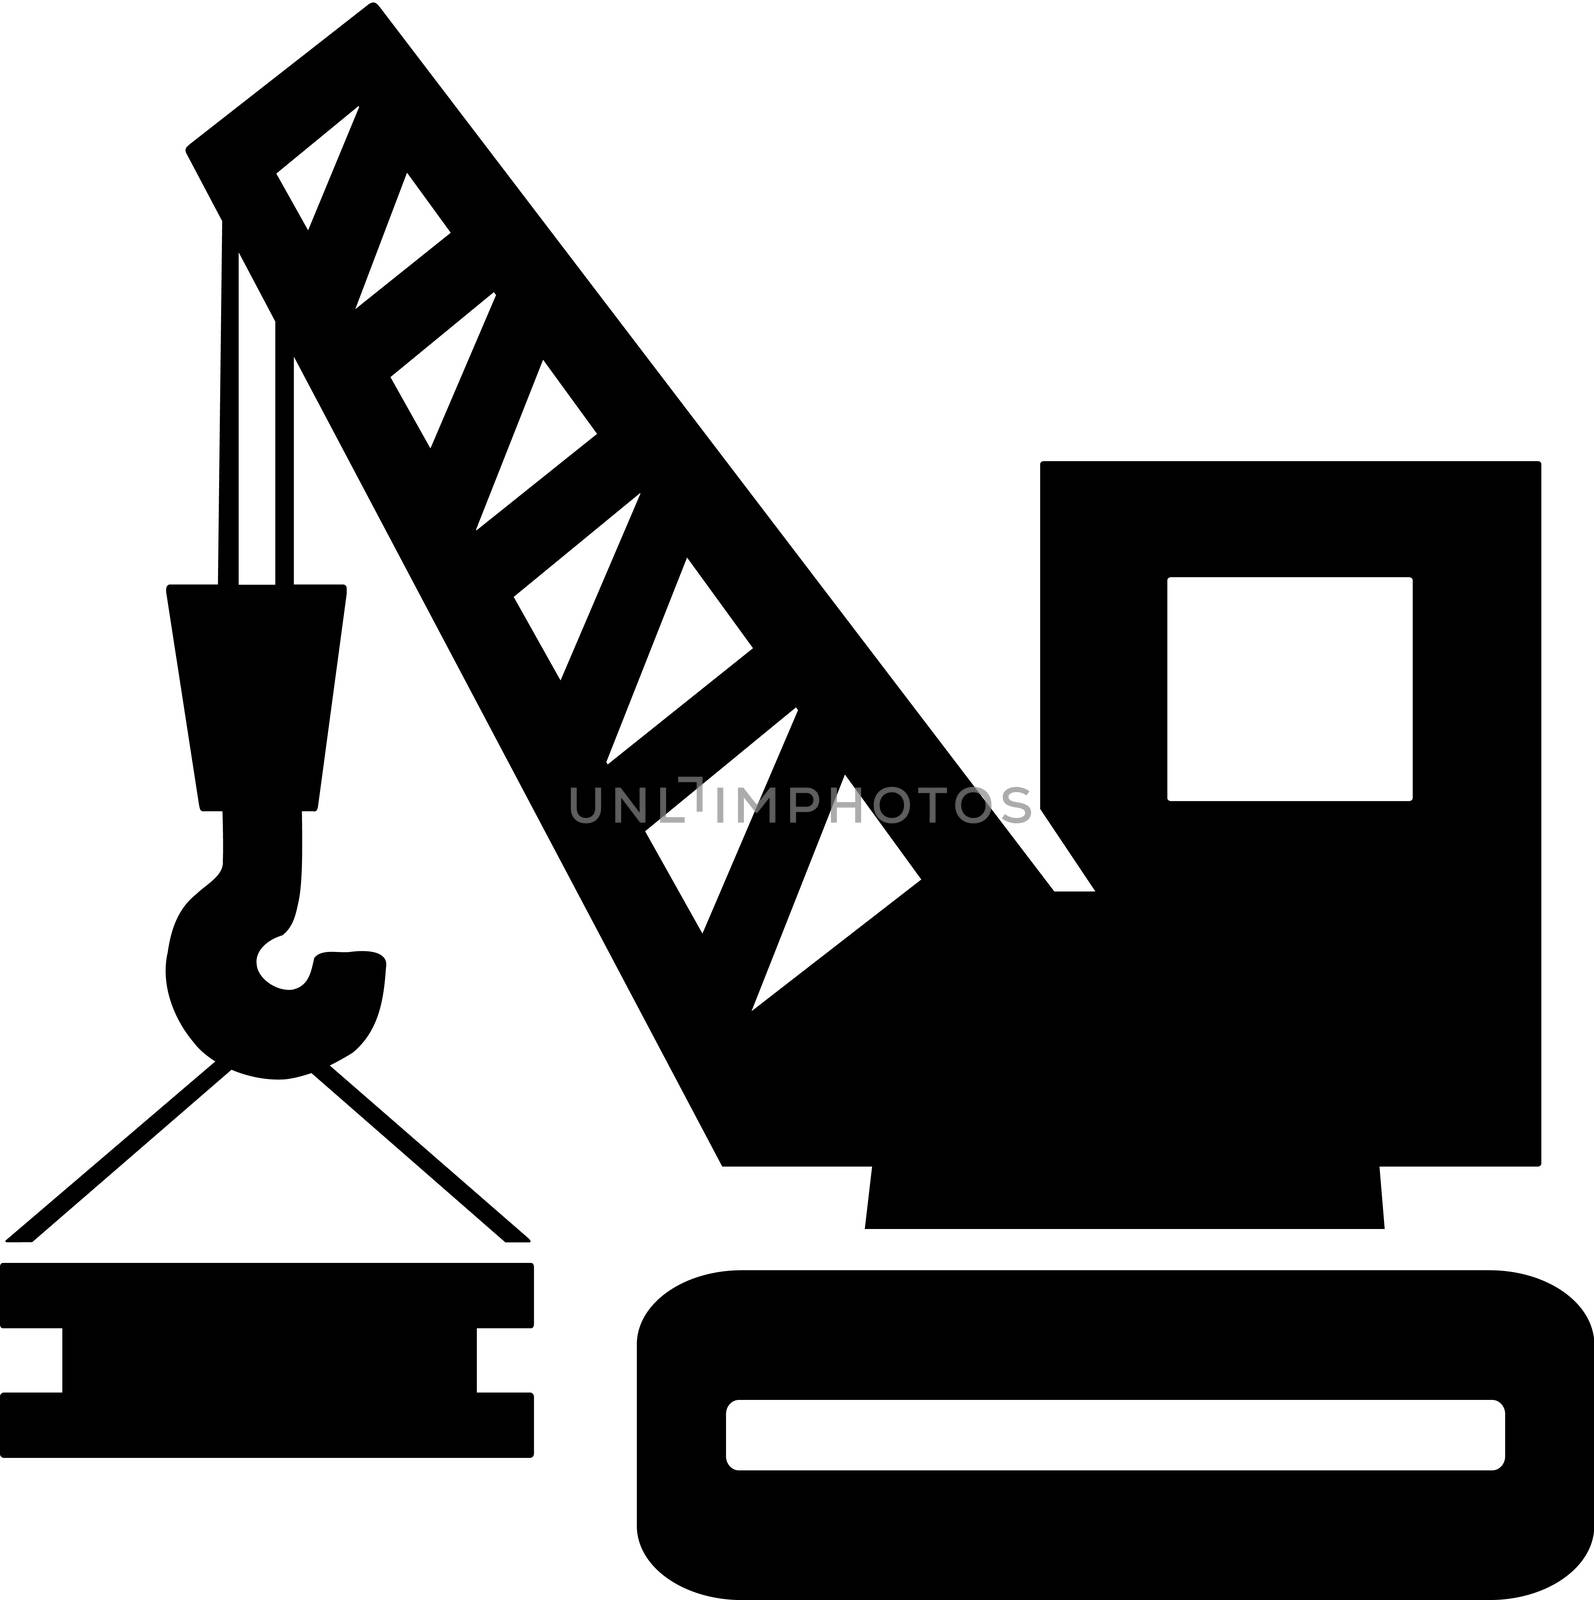 Silhouette of a crane lowering a heavy bar.